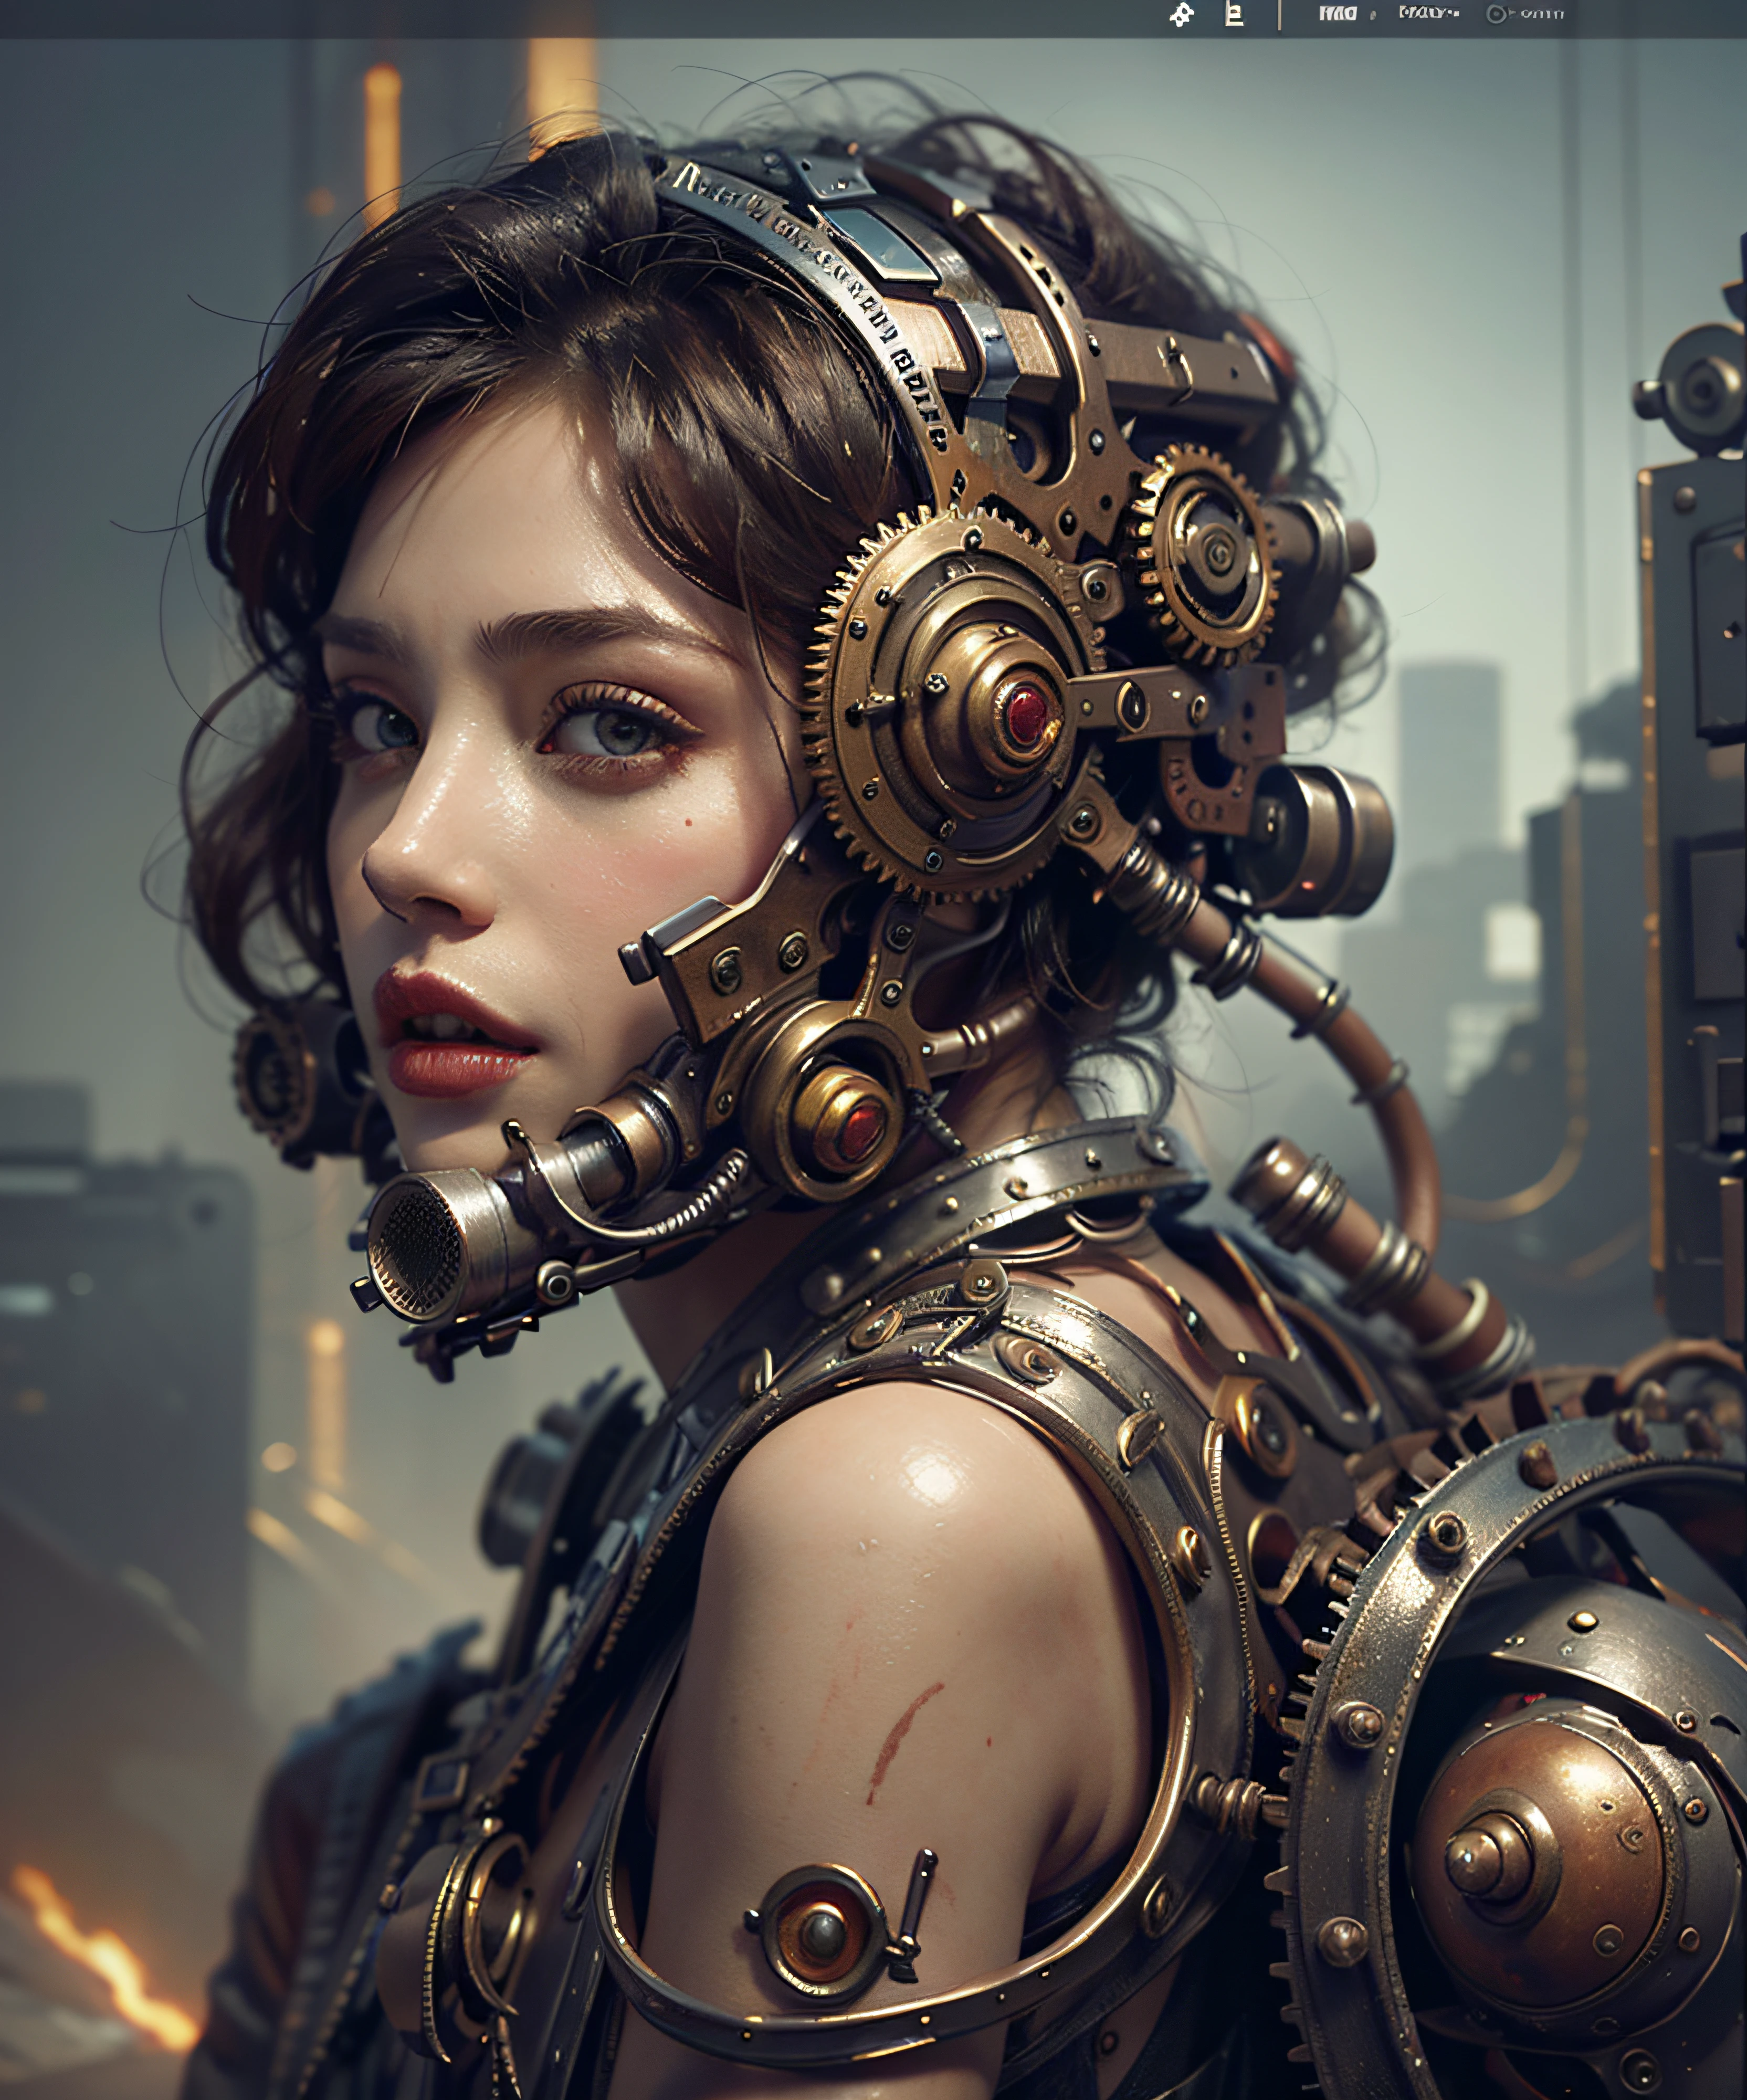 There's a woman with gears attached to her head with steam, Portrait of a mechanical woman, Realistic 4K digital art, Realistic 4K digital art, Wojtek FUS, Highly detailed 4k digital art, Cyber Steampunk 8K 3D, arte steampunk digital, 8k realistic digital art, Detailed 4k digital art, Ultra-realistic 8K cyberpunk art, ultra realistic concept art,